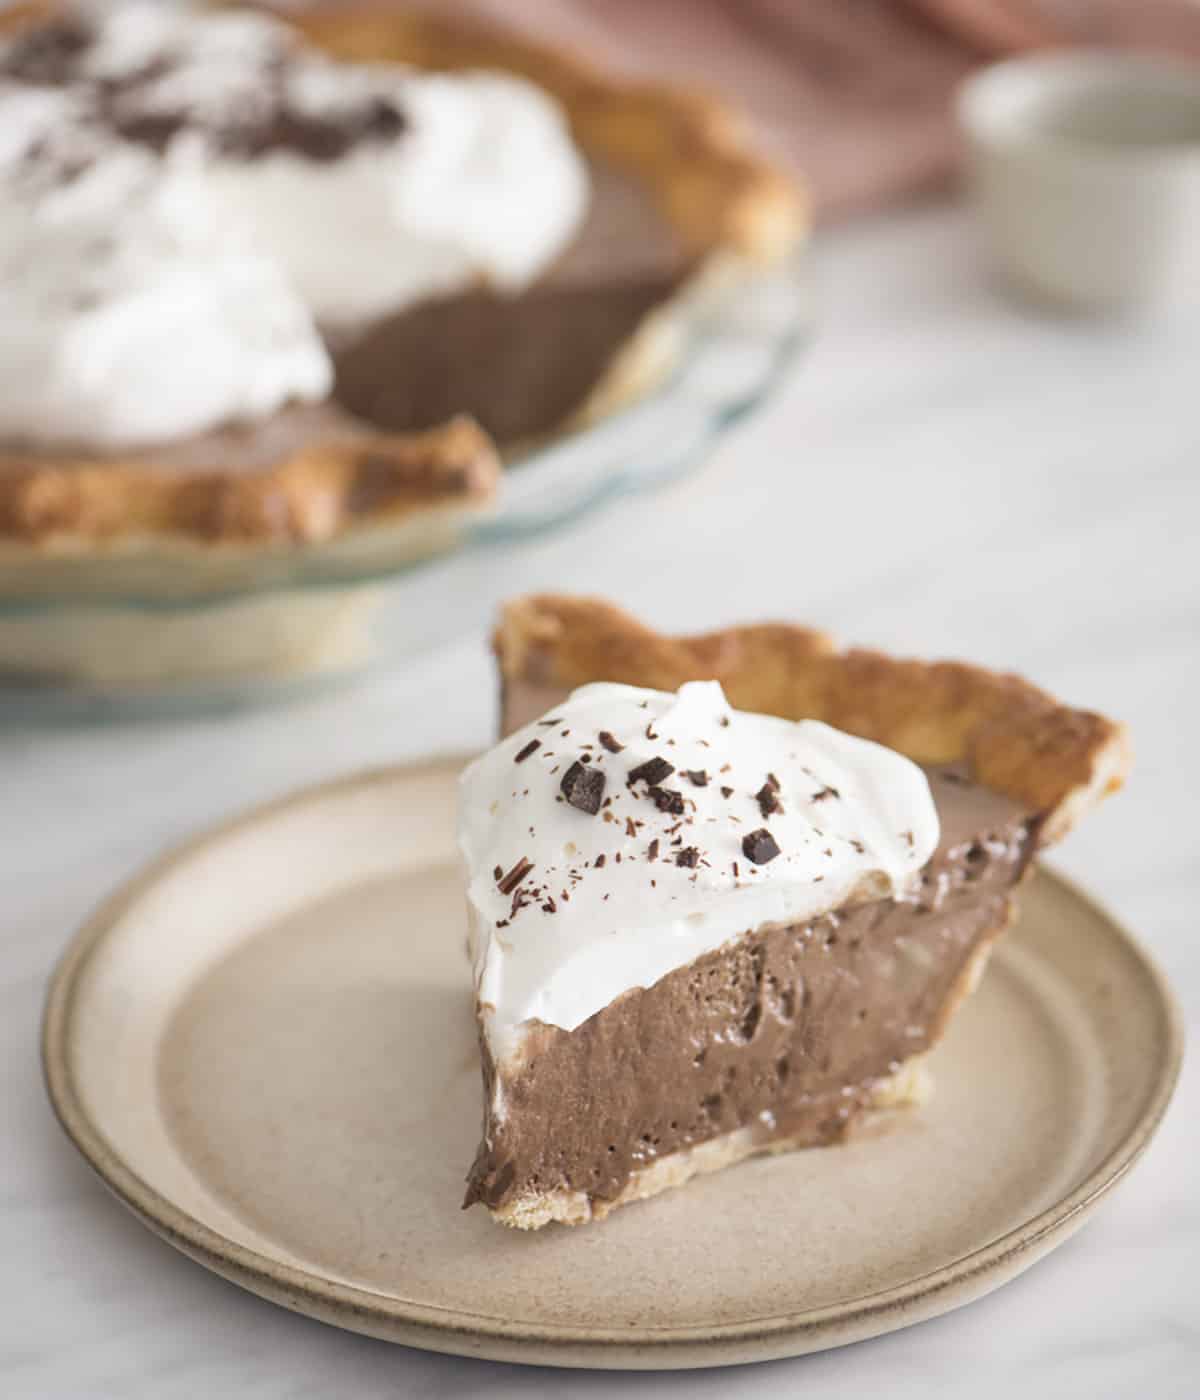 A piece of chocolate pie topped with whipped cream and shaved chocolate.